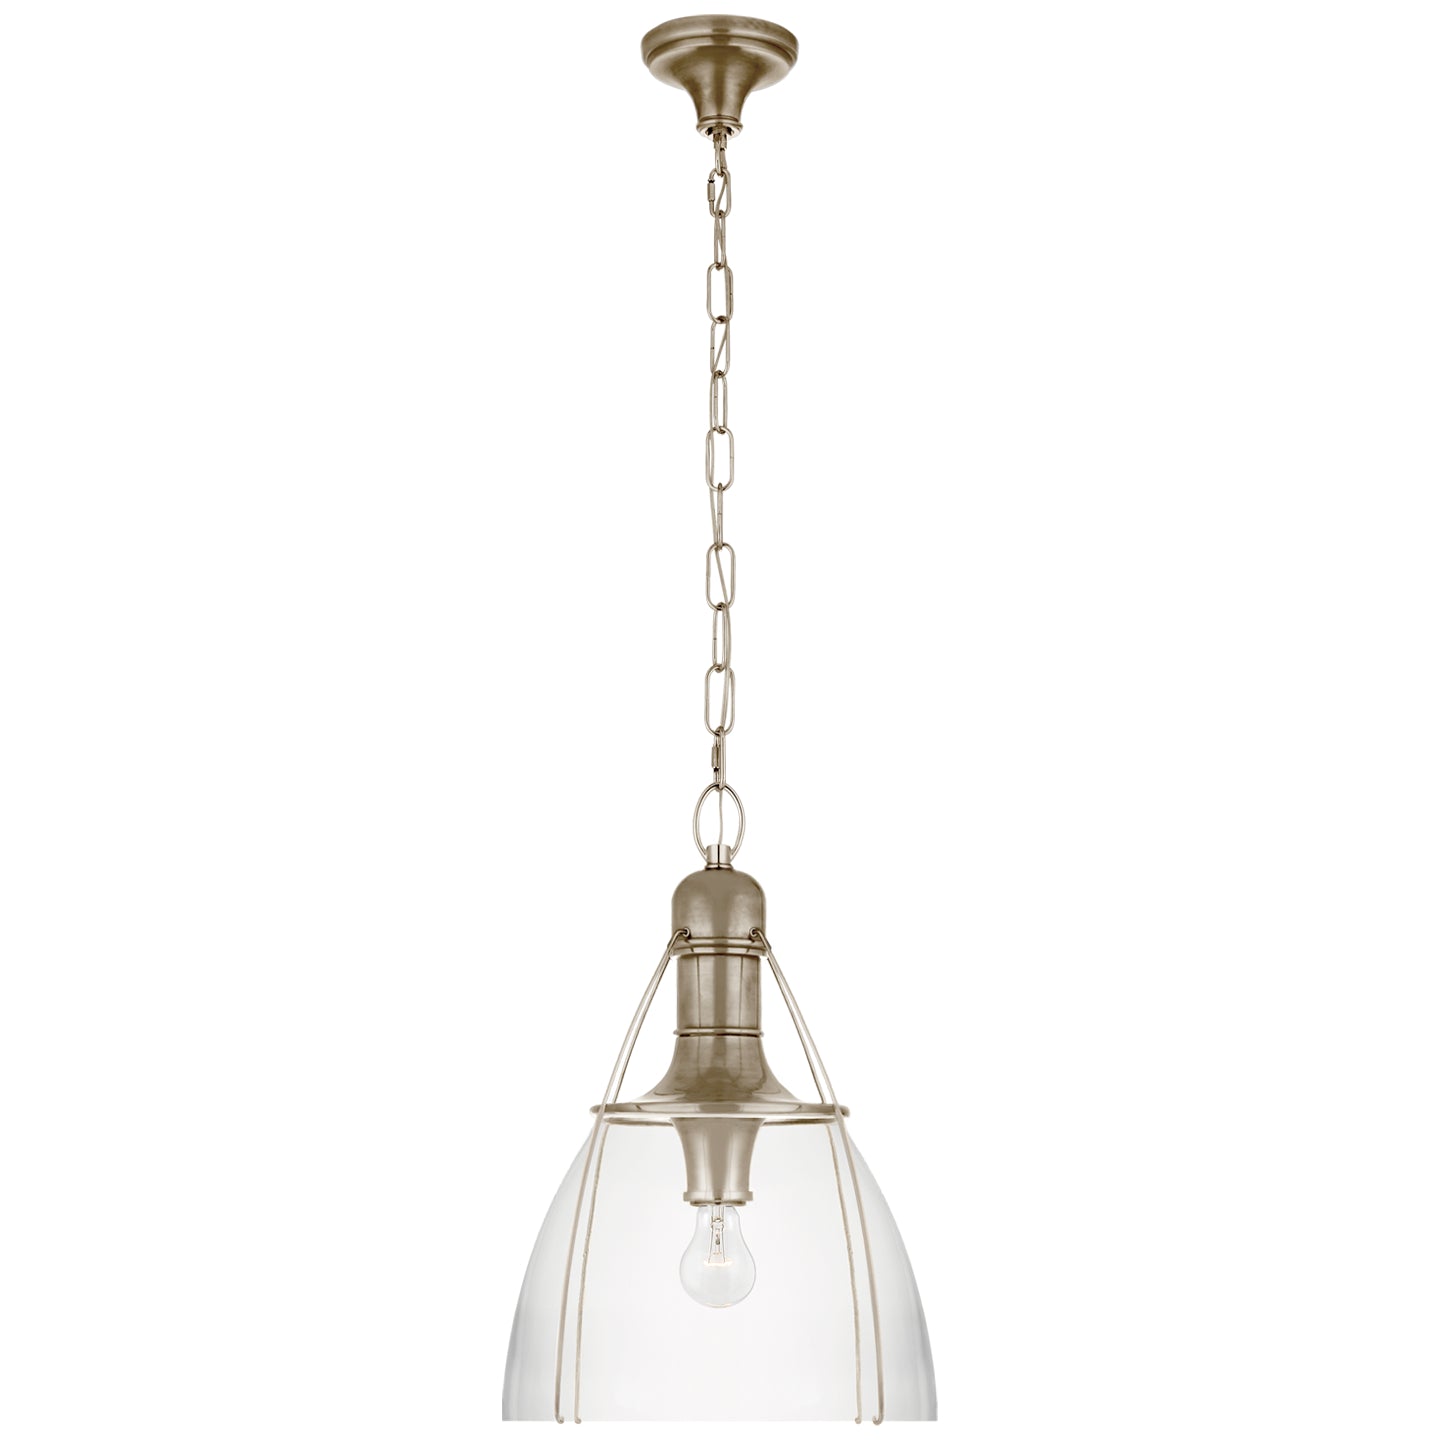 Load image into Gallery viewer, Visual Comfort Signature - CHC 5476AN-CG - One Light Pendant - Prestwick - Antique Nickel
